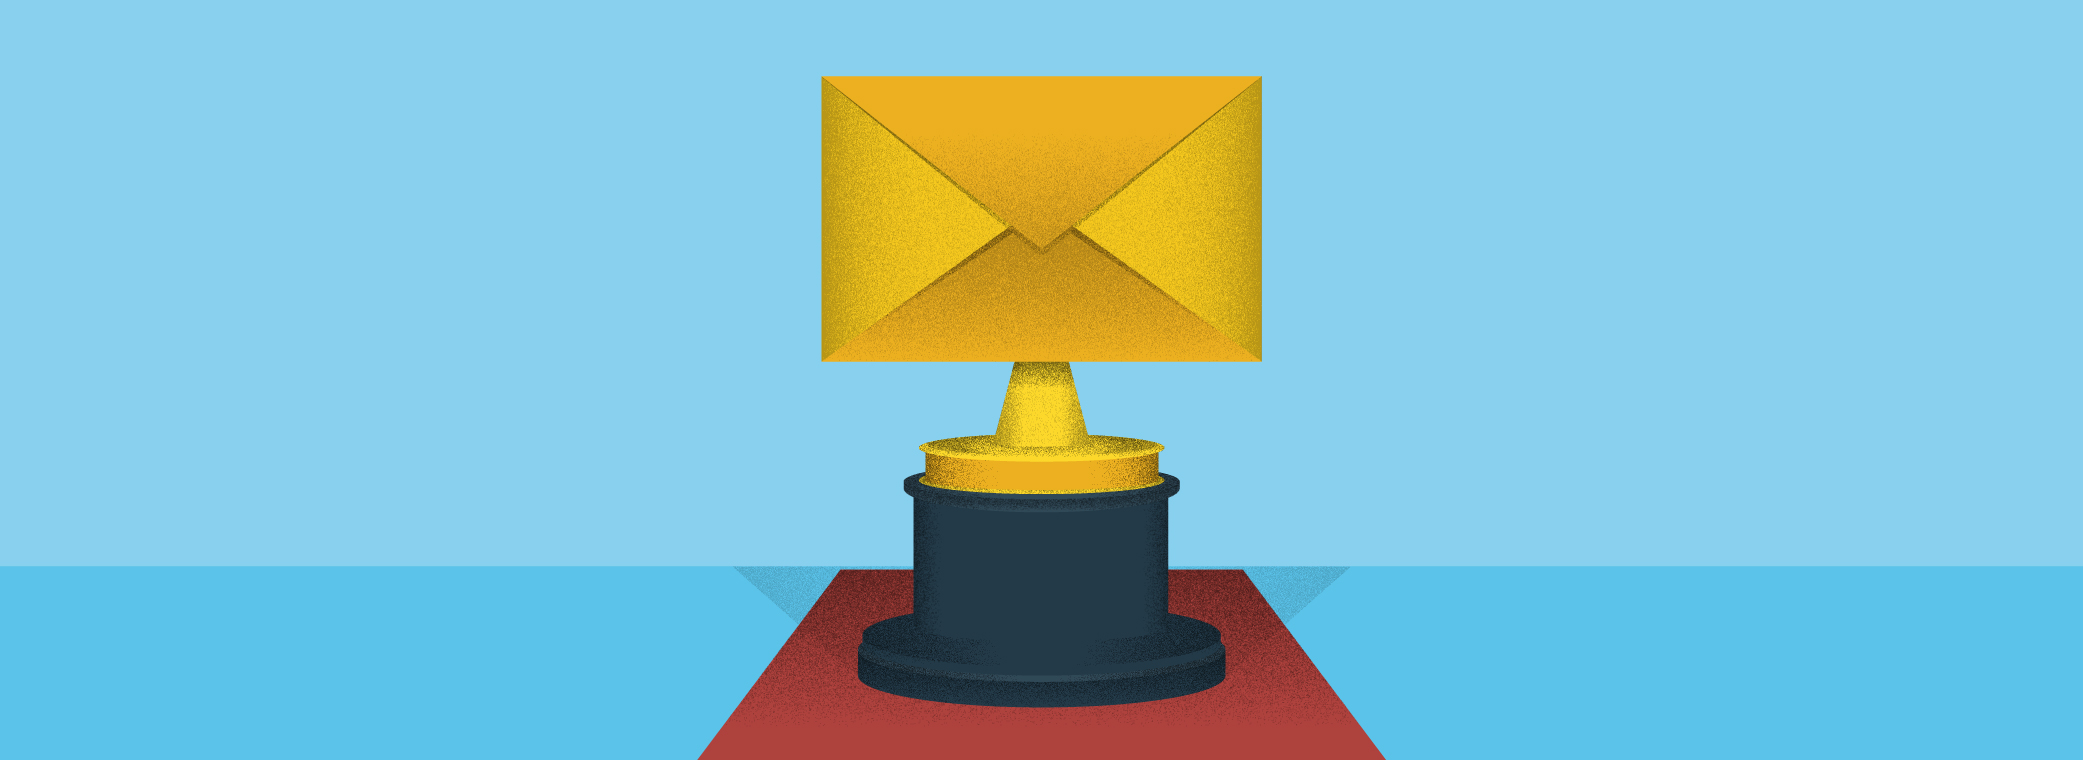 Four ways to win at email marketing